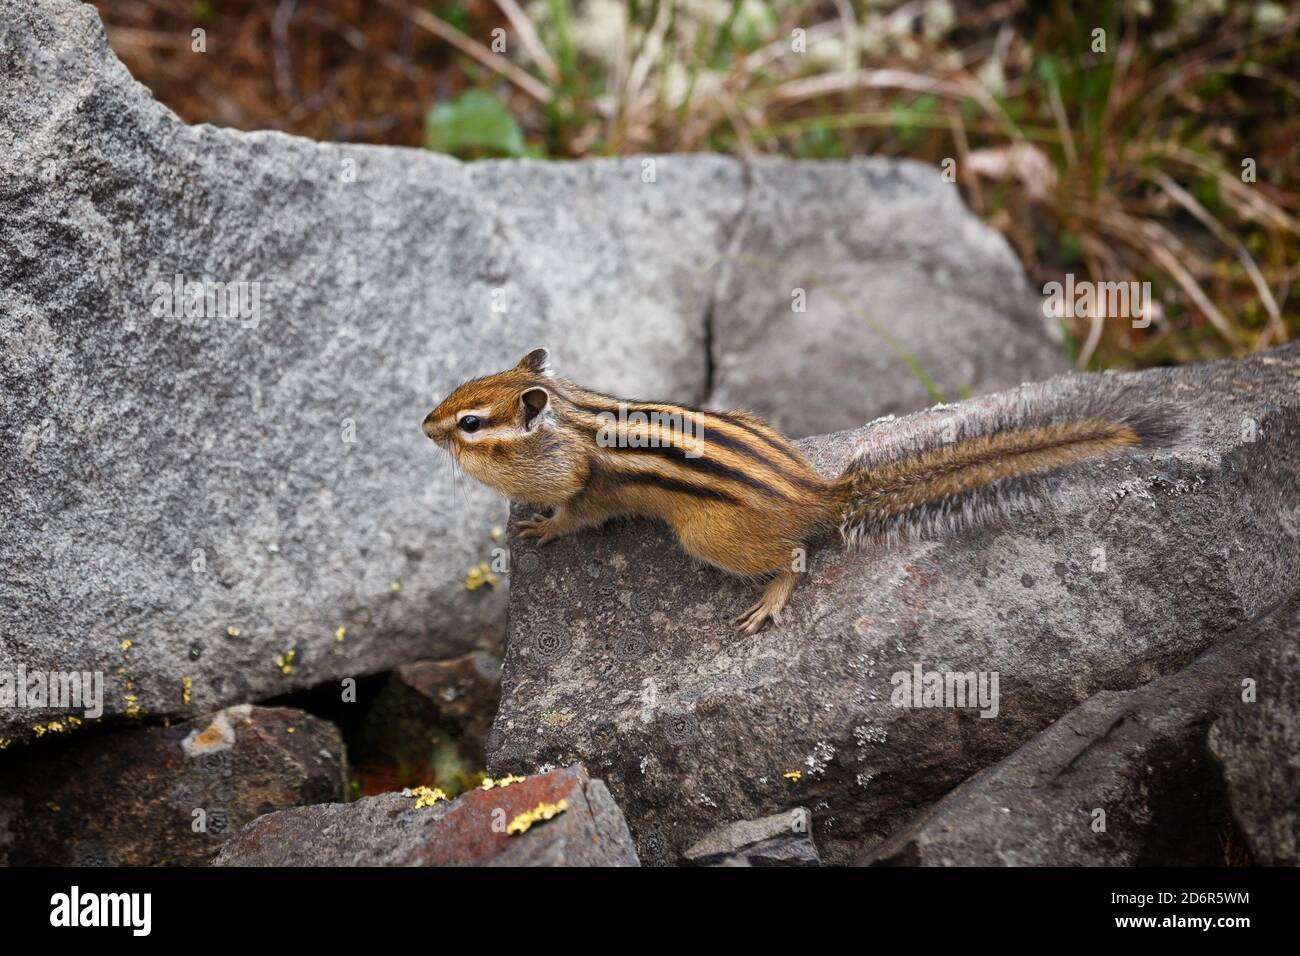 Chipmunk on a stone with stuffed cheek pouches Stock Photo